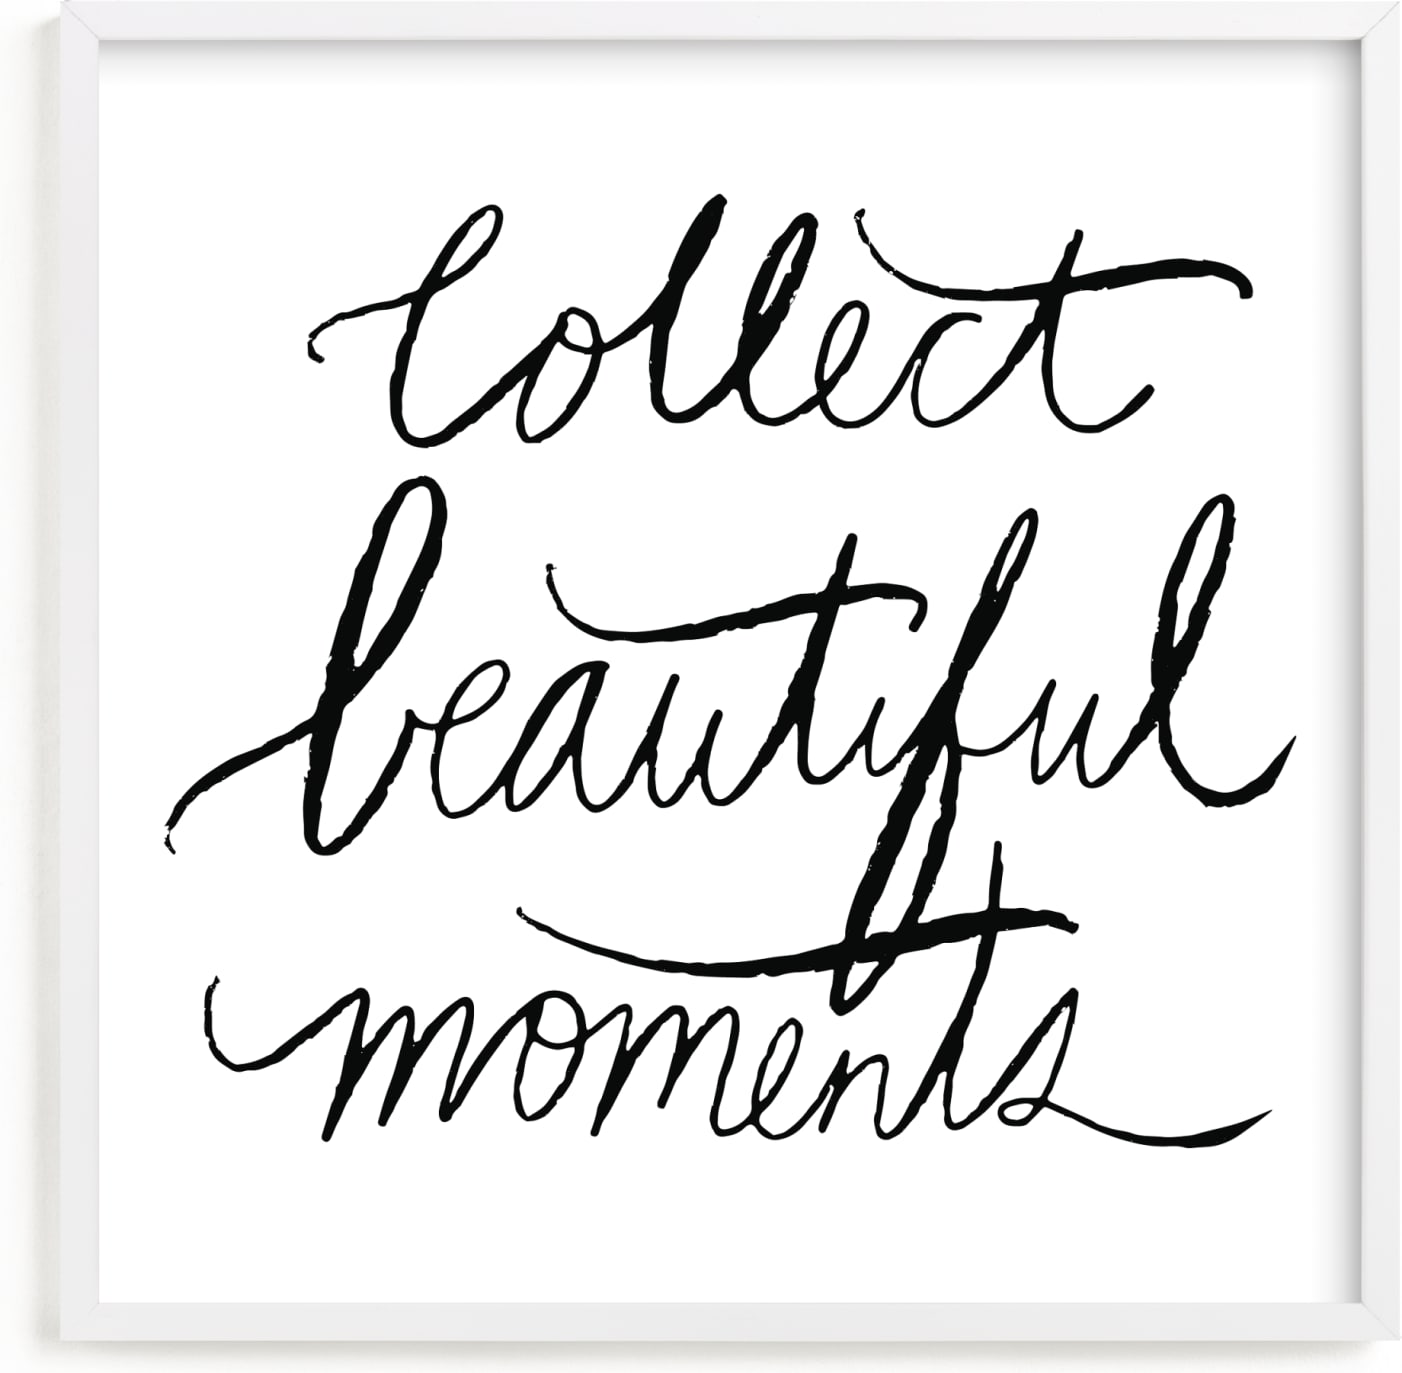 This is a black and white kids wall art by Vivian Yiwing called collect beautiful moments.